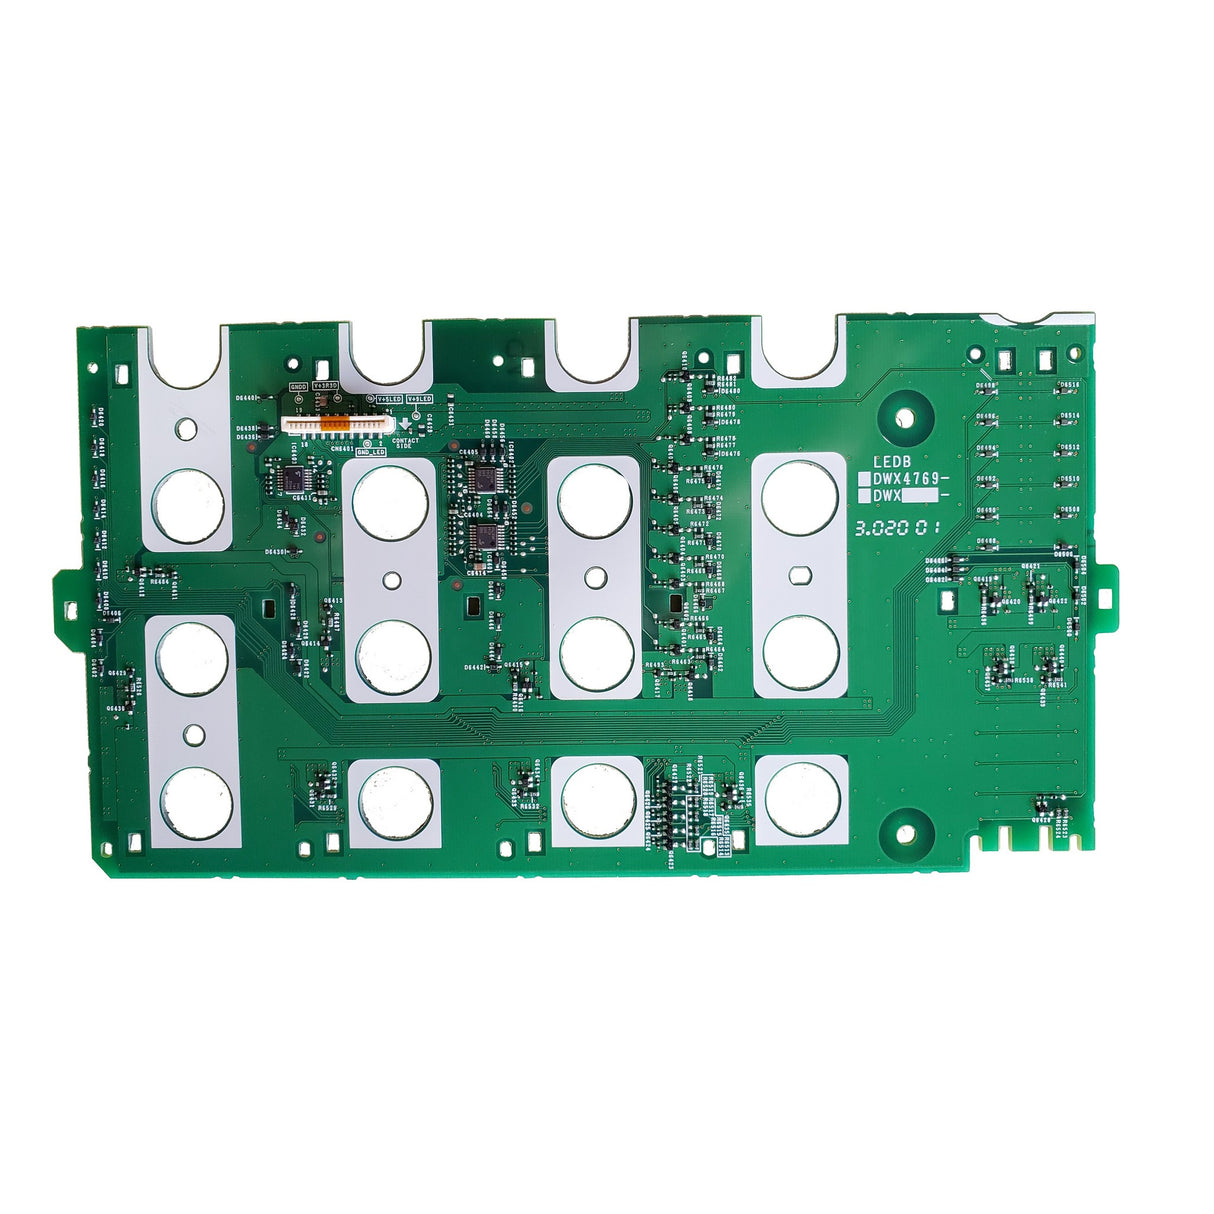 Pioneer DJ DWX4769 Replacement LEDB Assembly for DJM-A9